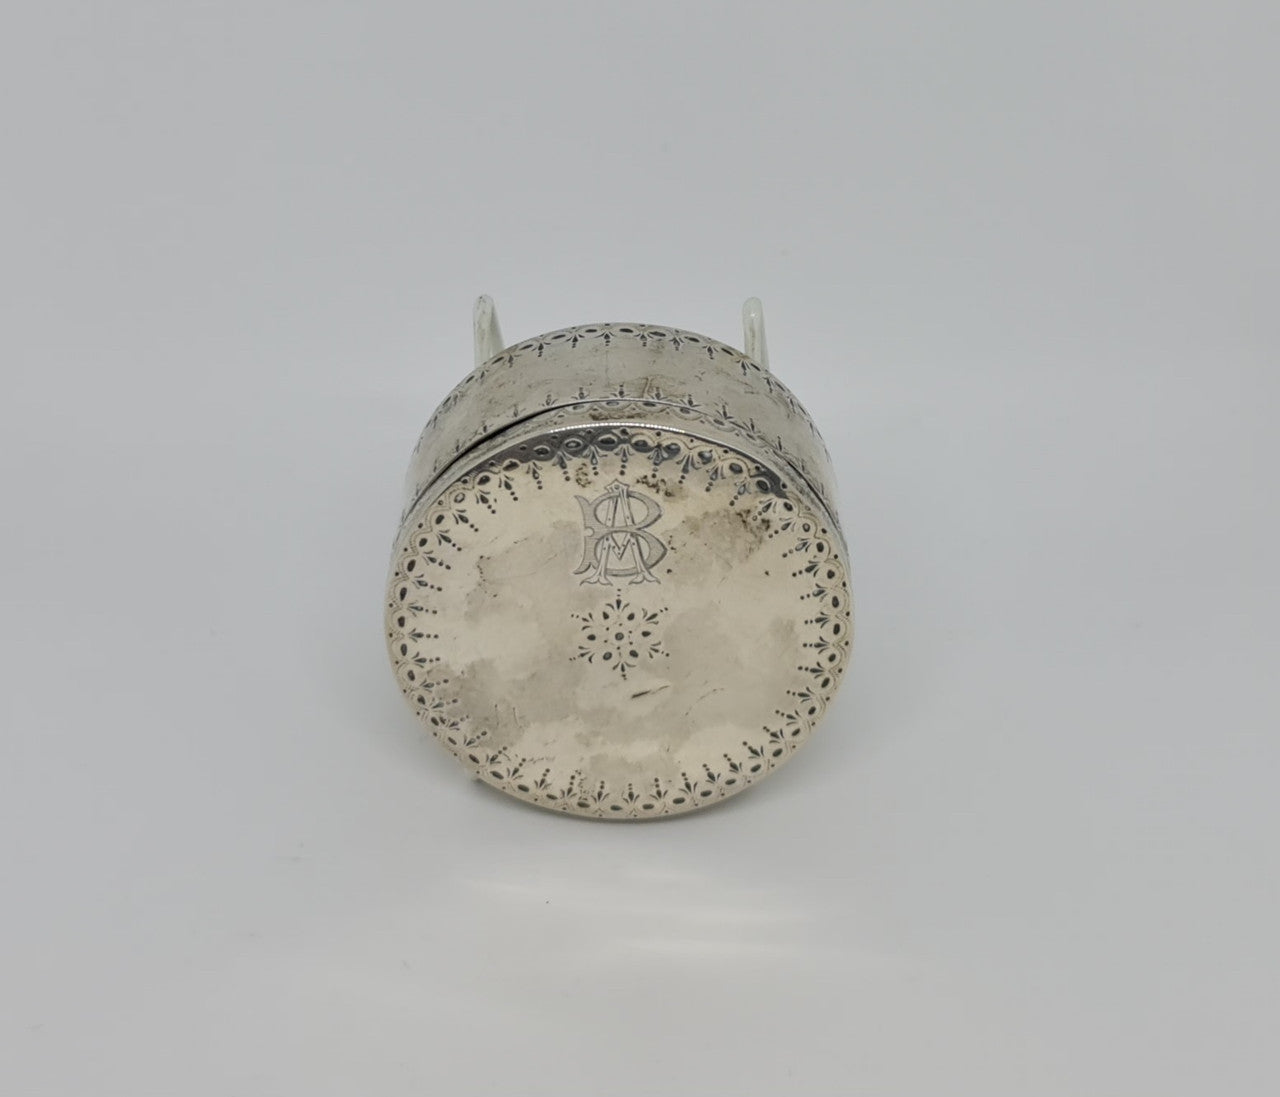 Gorgeous antique French silver trinket box / snuff box in great original condition.